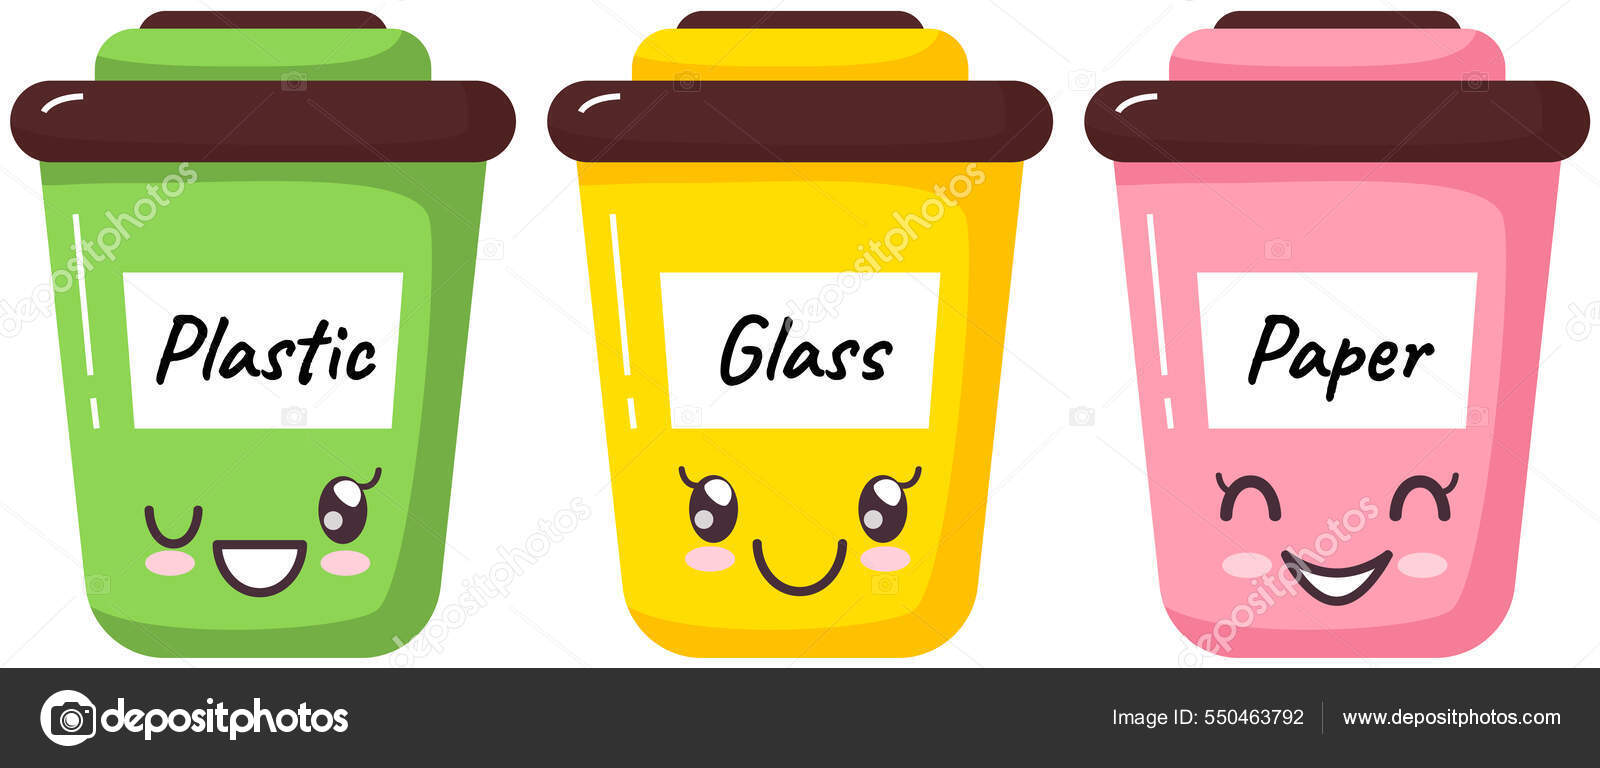 https://st.depositphotos.com/2419757/55046/v/1600/depositphotos_550463792-stock-illustration-garbage-sorting-containers-in-cute.jpg